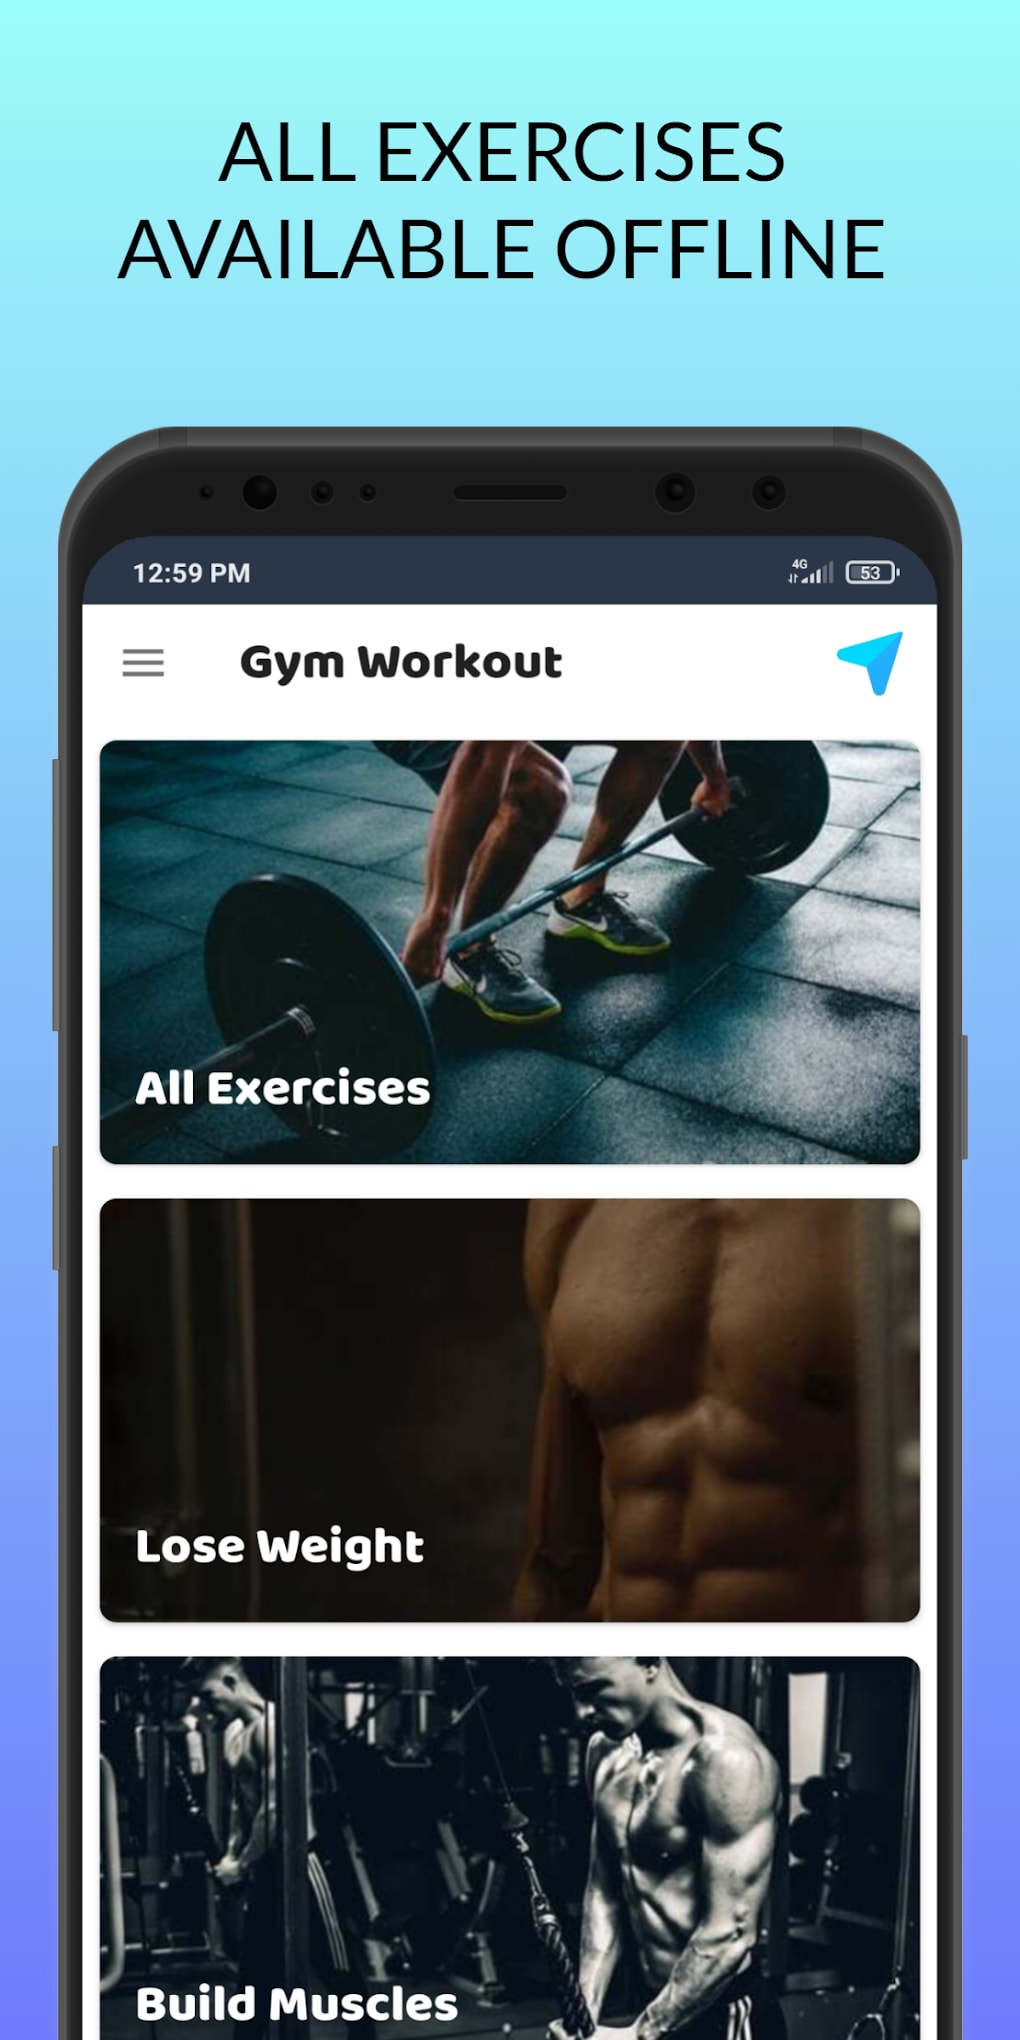 Gym Workout Offline Exercises For